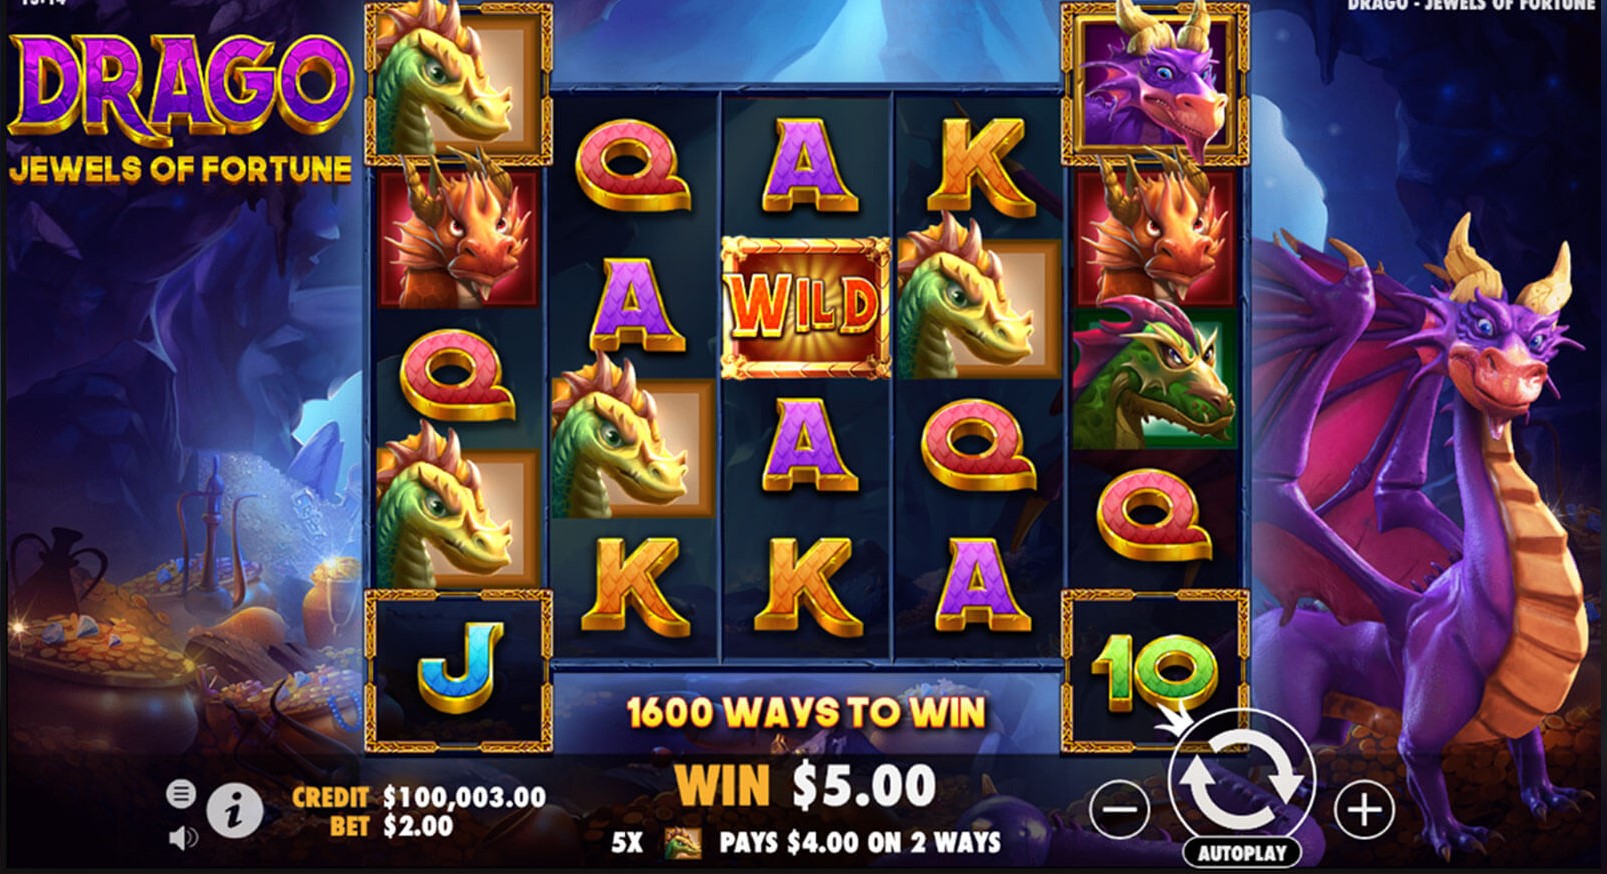 Drago Jewels of Fortune Slot Game